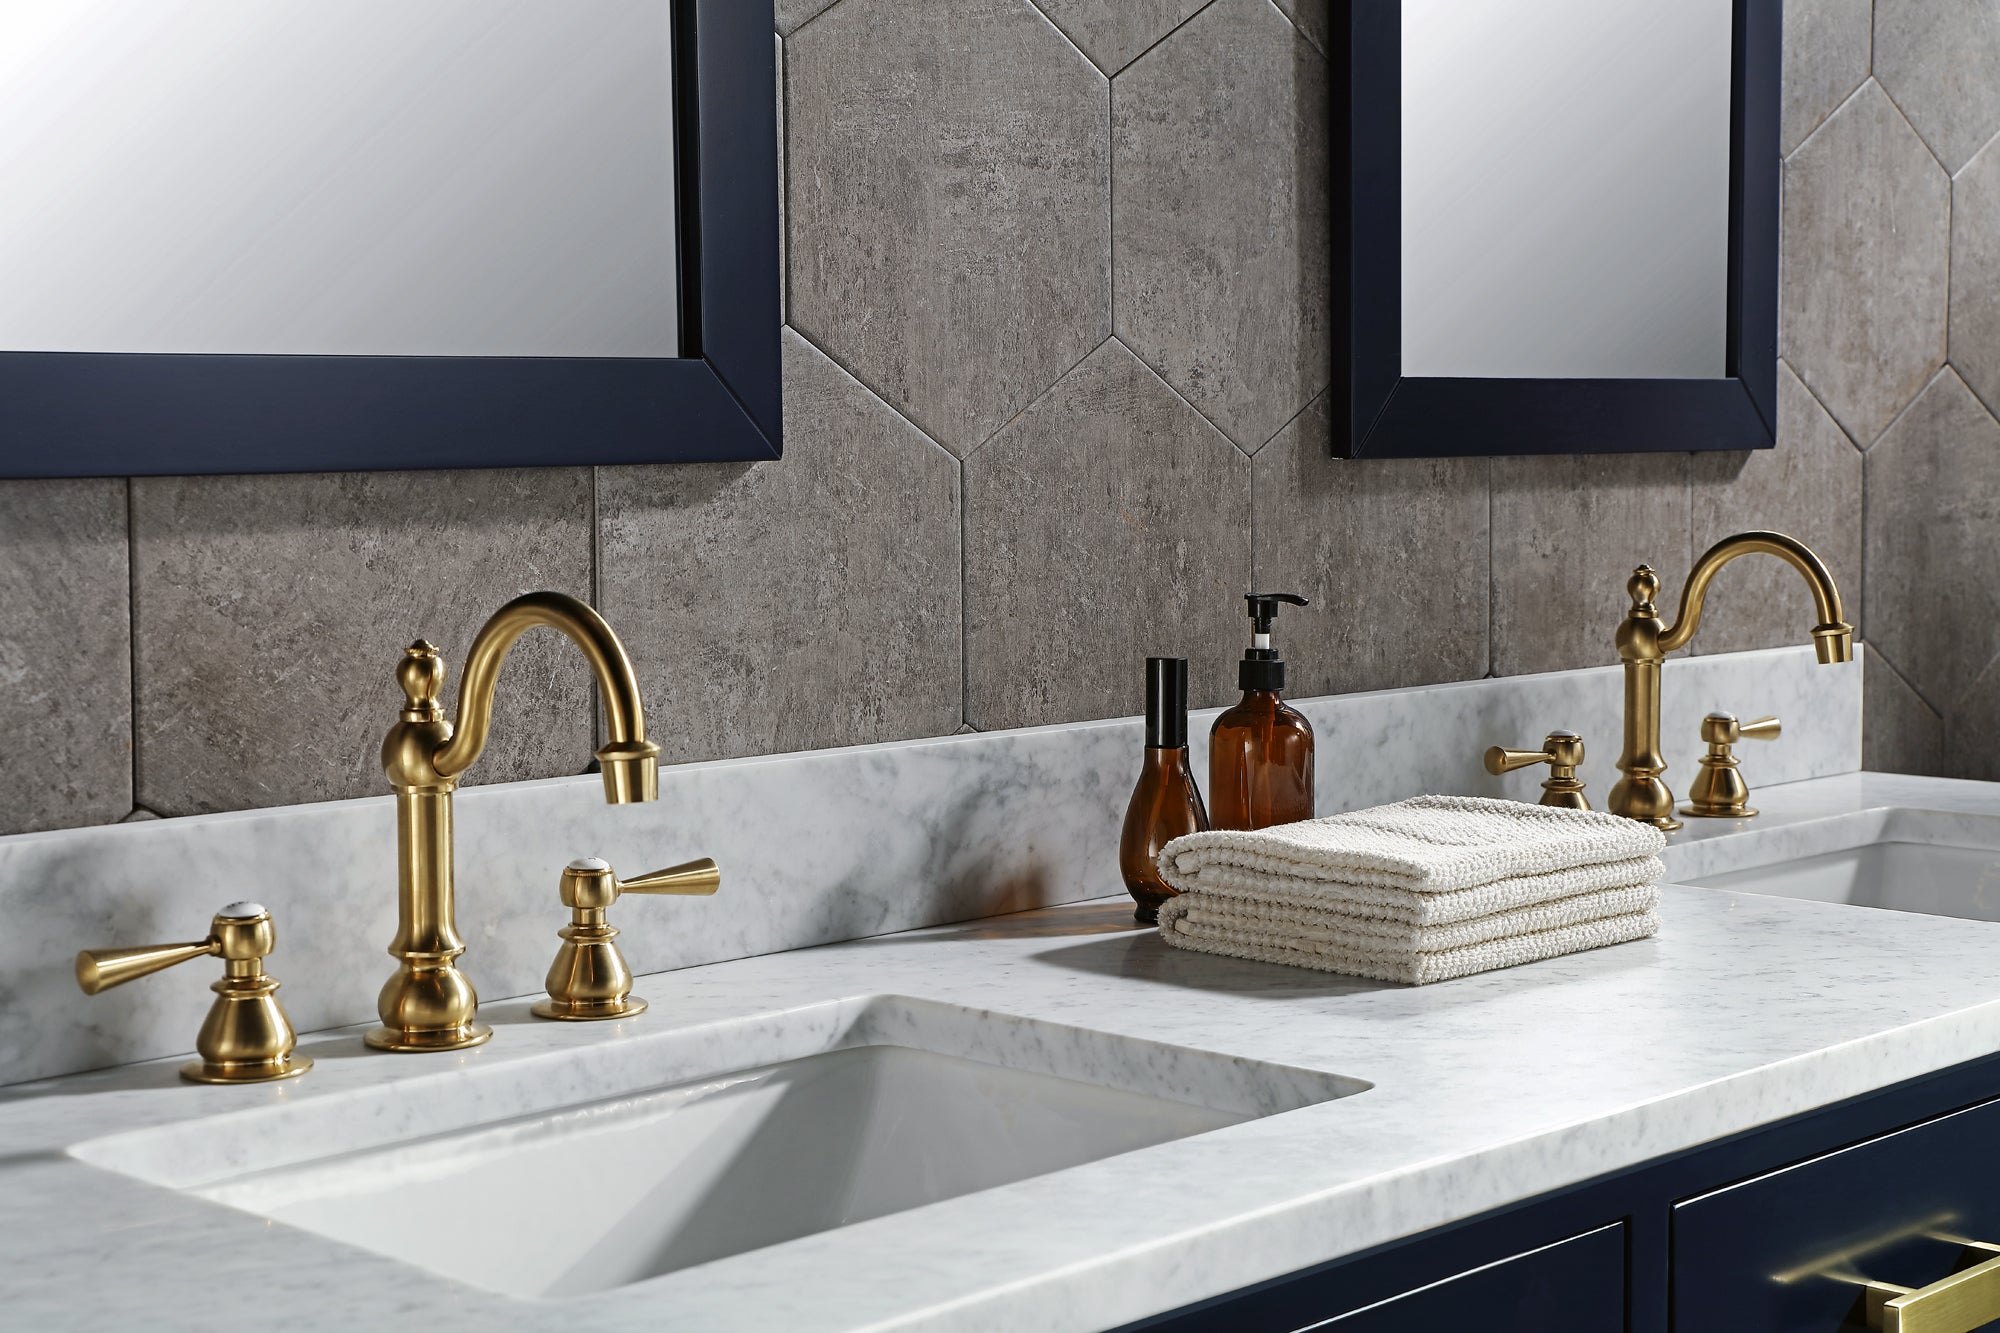 Water Creation | Madison 72-Inch Double Sink Carrara White Marble Vanity In Monarch Blue With Matching Mirror(s) and F2-0012-06-TL Lavatory Faucet(s) | MS72CW06MB-R21TL1206